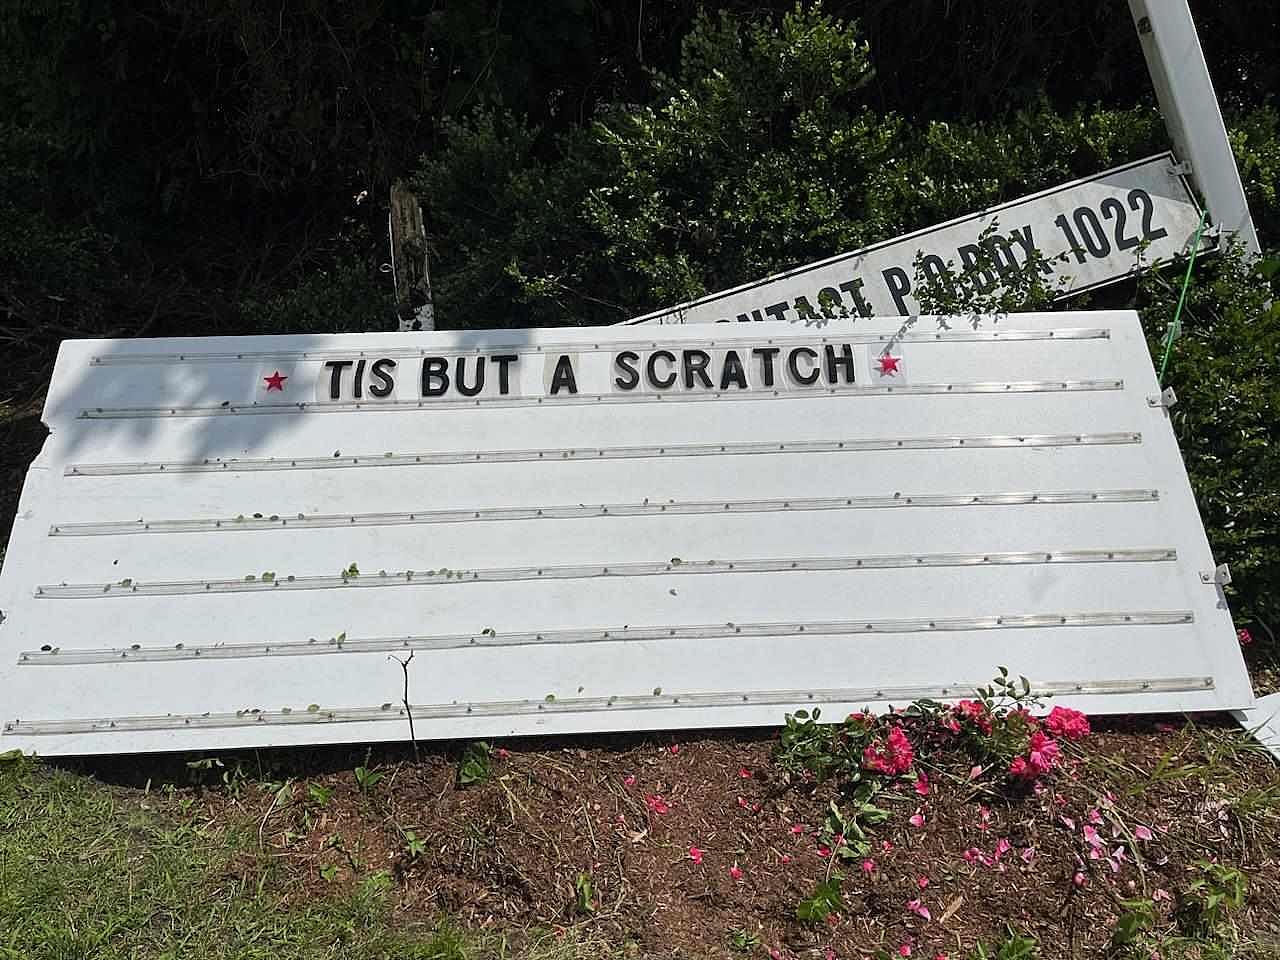 Mattapoisett Sign Destroyed in Crash Leads to Humorous Message